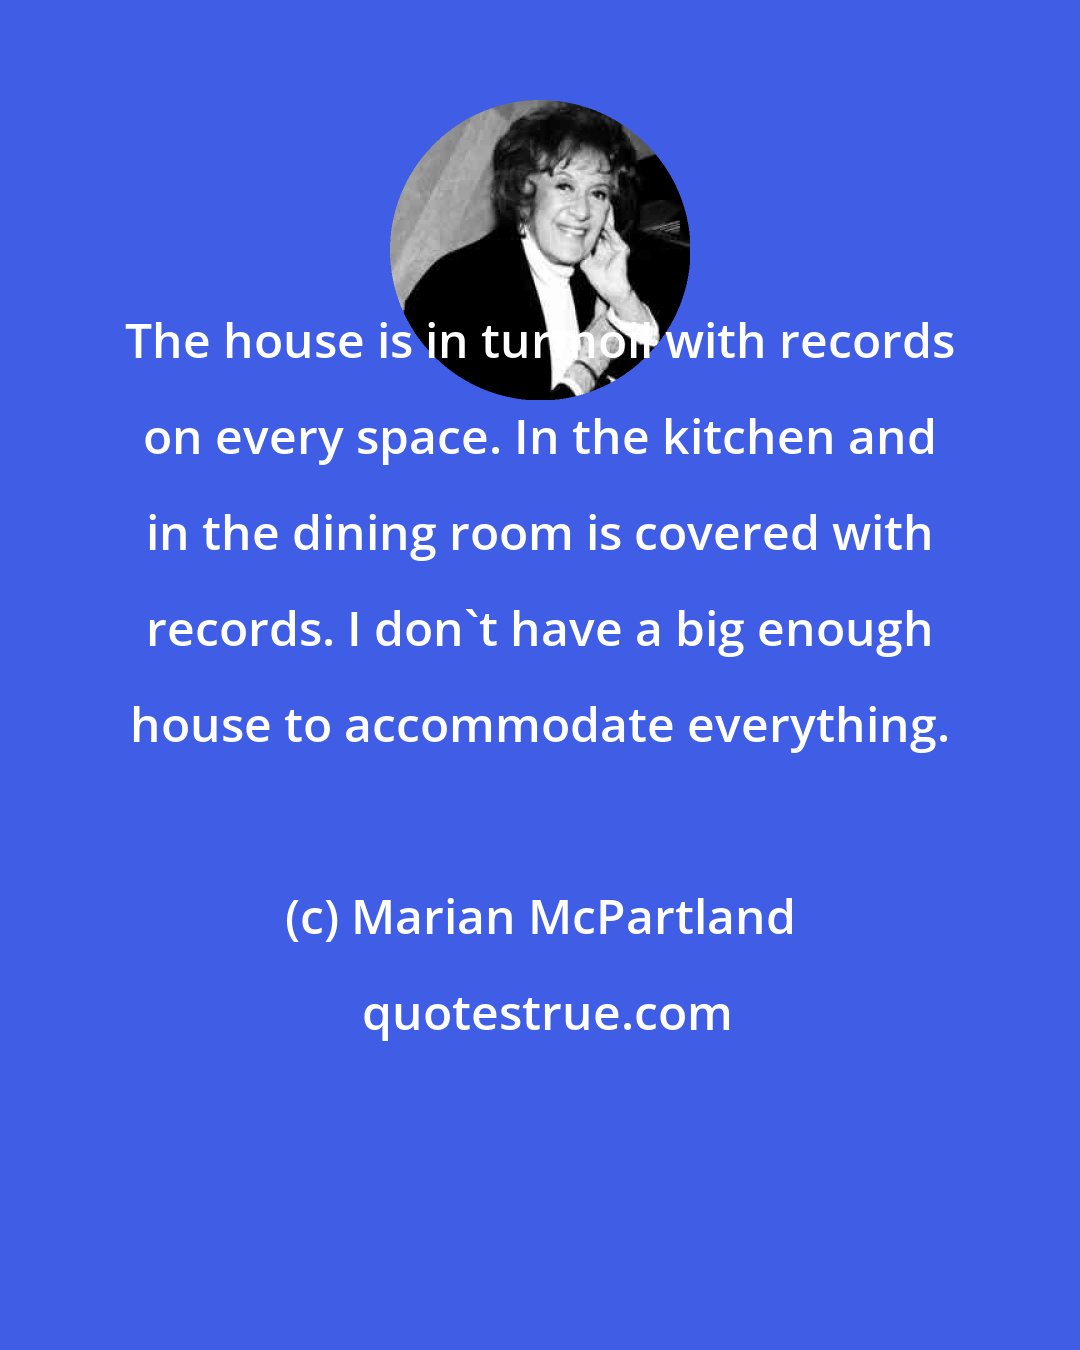 Marian McPartland: The house is in turmoil with records on every space. In the kitchen and in the dining room is covered with records. I don't have a big enough house to accommodate everything.